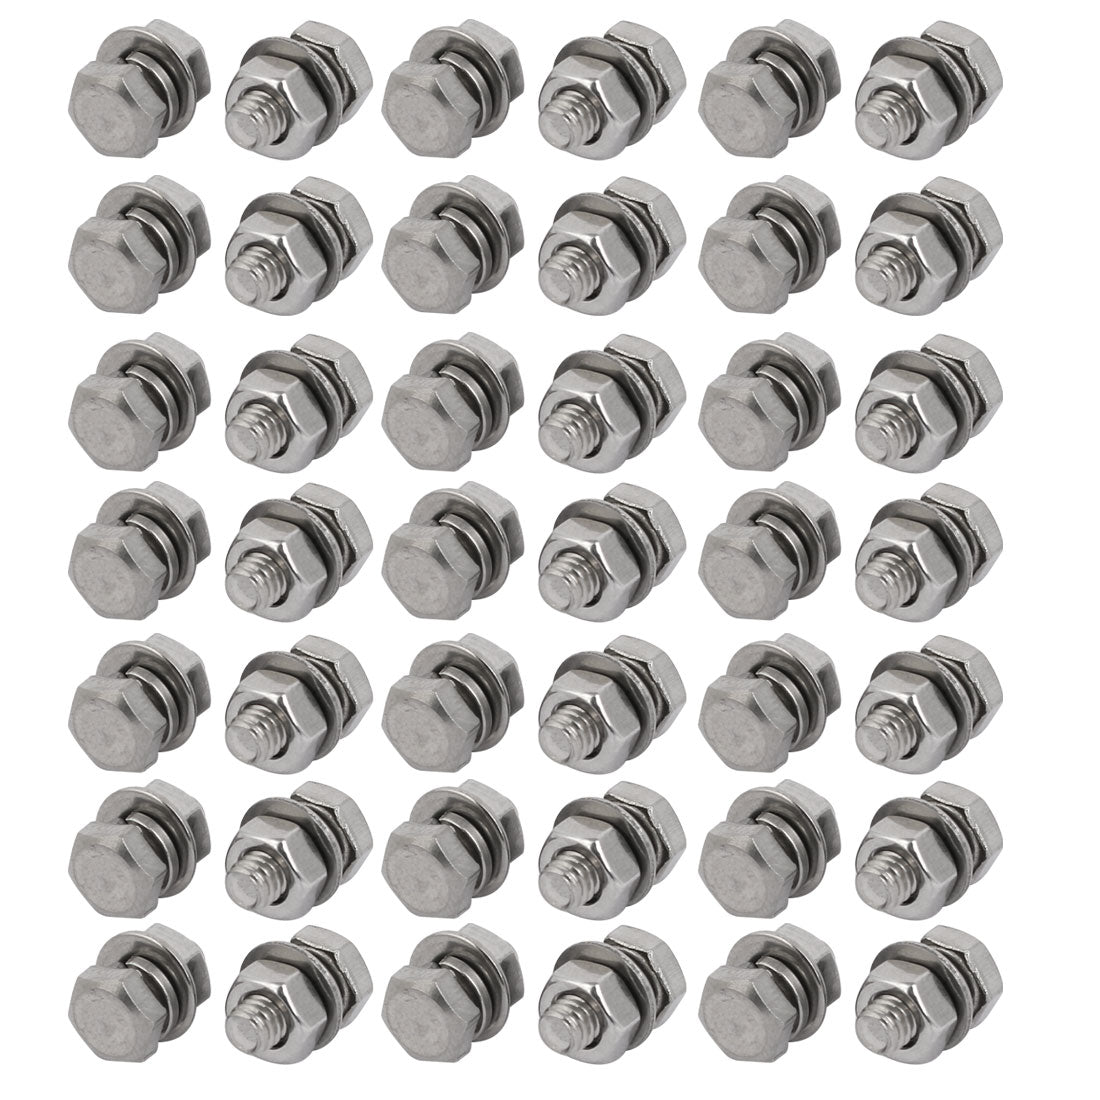 uxcell Uxcell 50pcs 304 Stainless Steel M4x10mm Hex Bolts w Nuts and Washers Assortment Kit